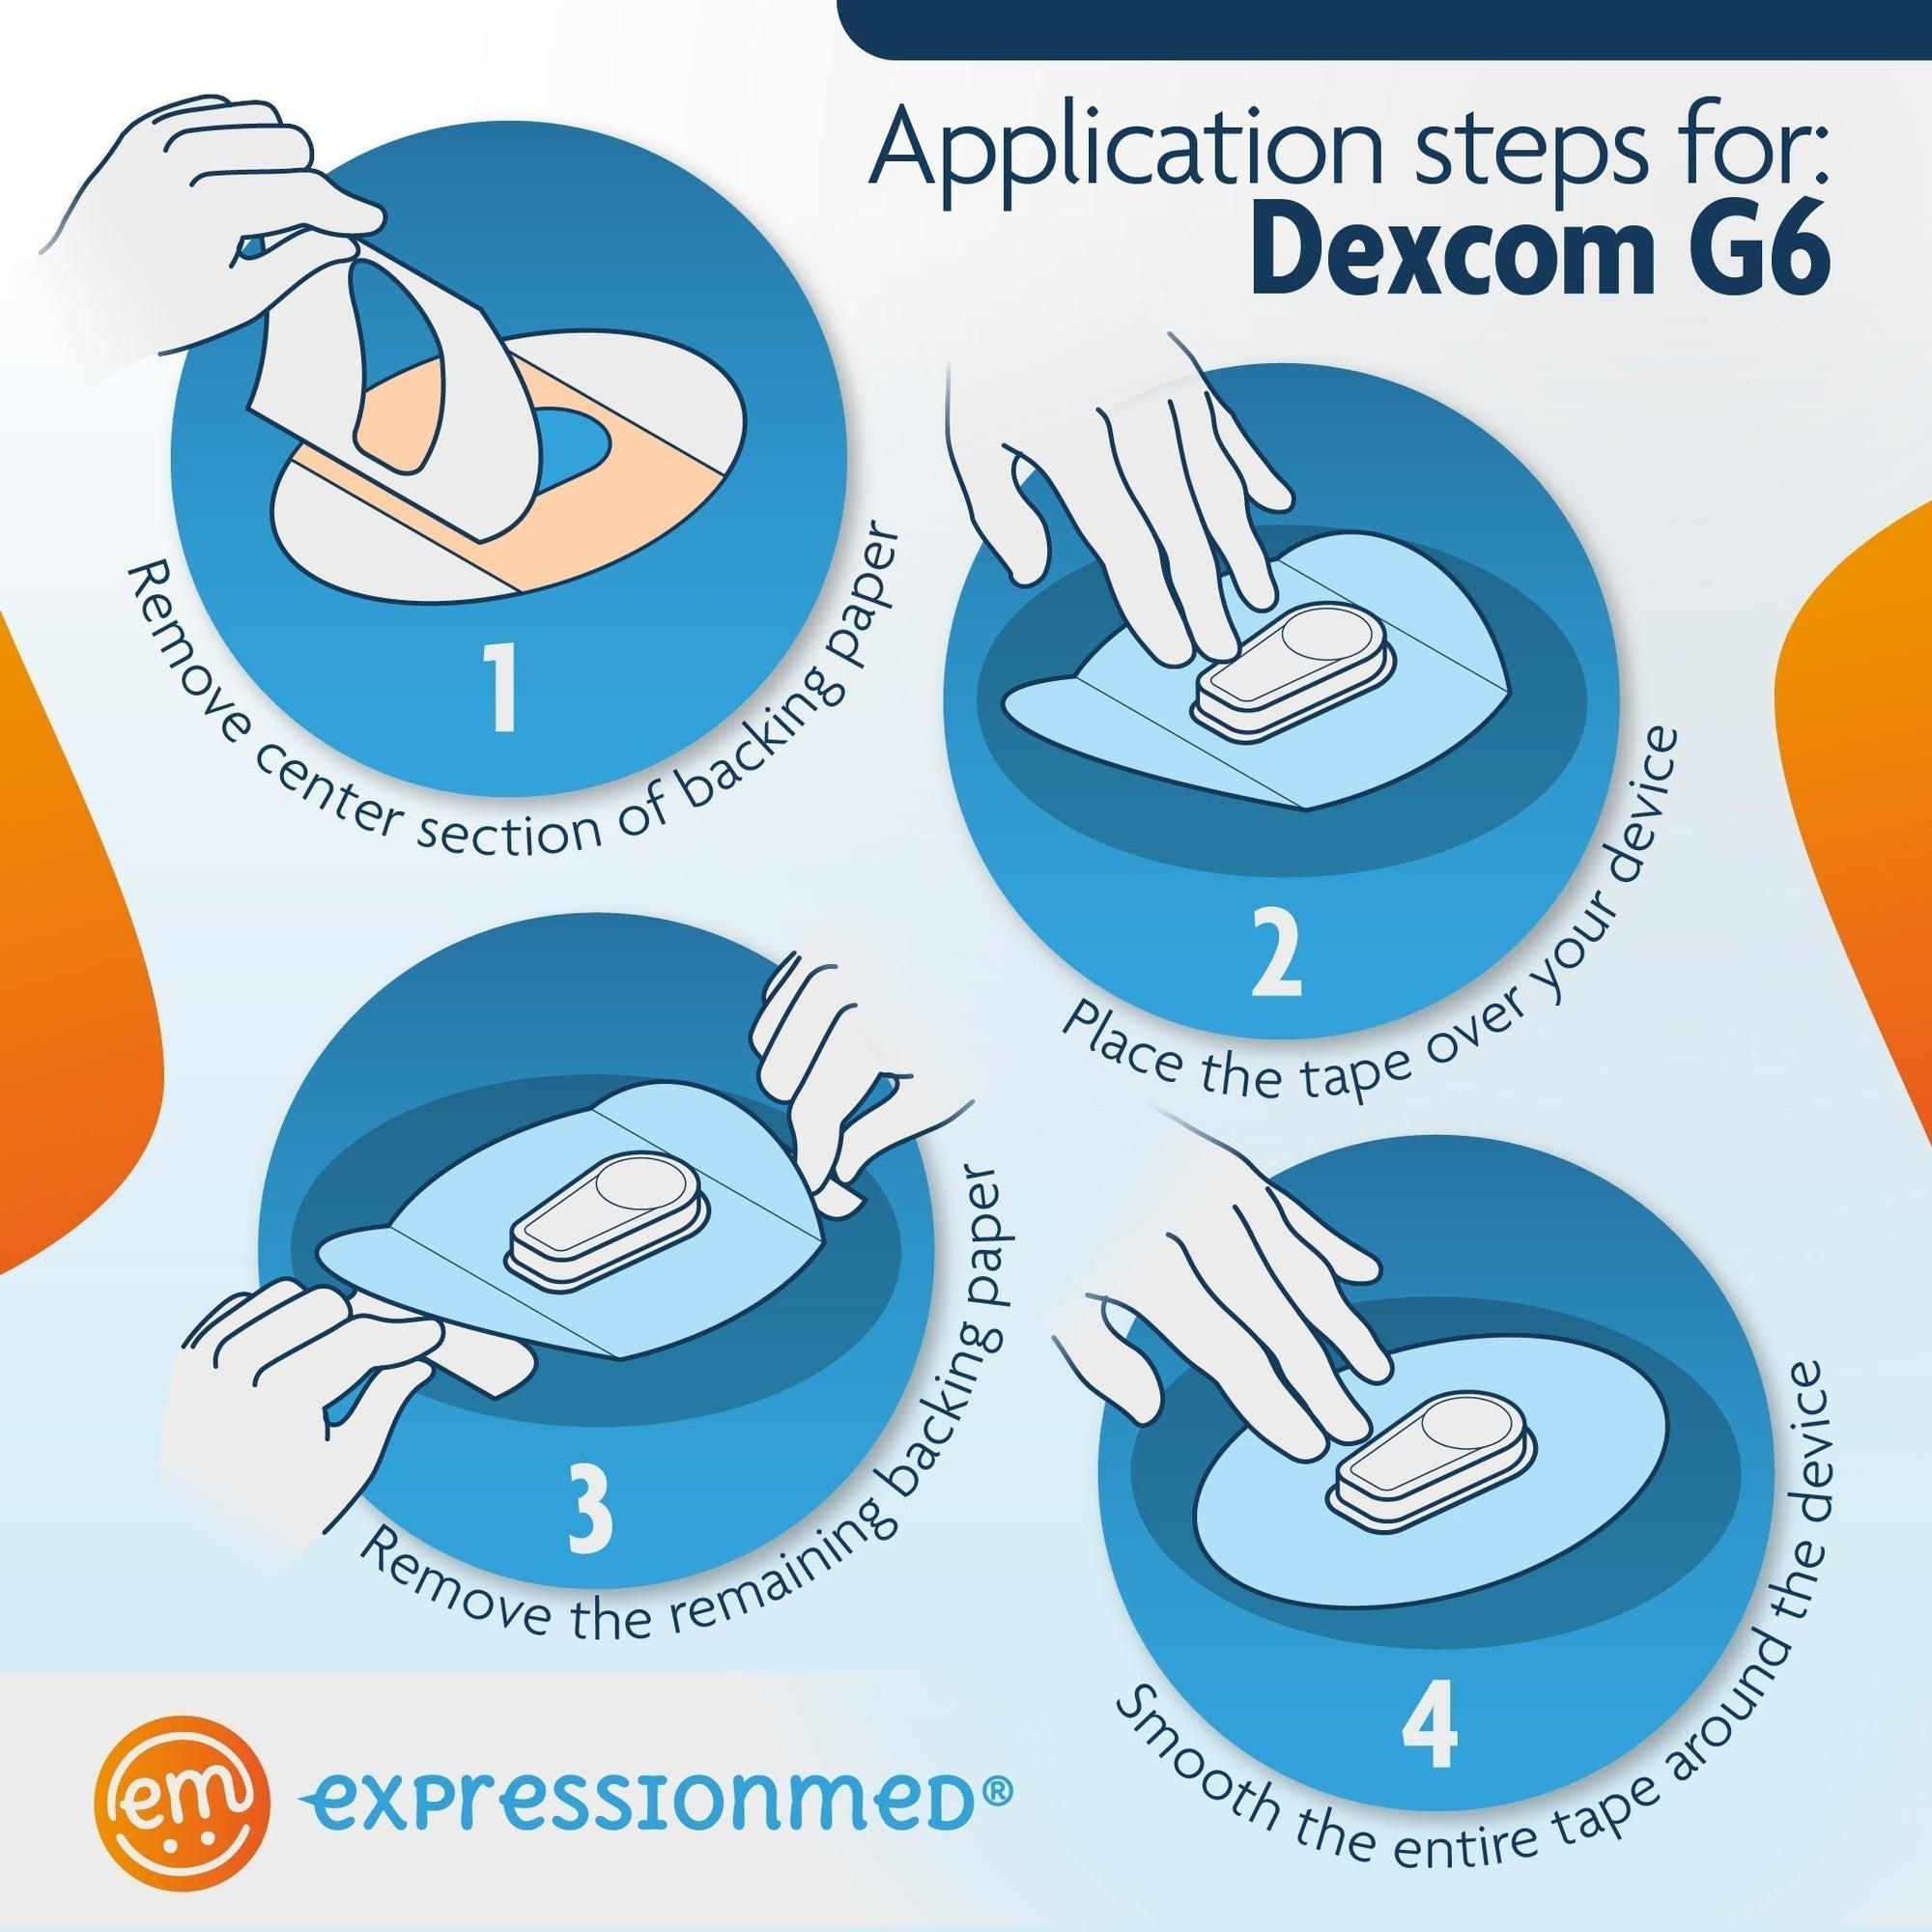 ExpressionMed Instructions for proper application of dexcom g6 mini adhesives